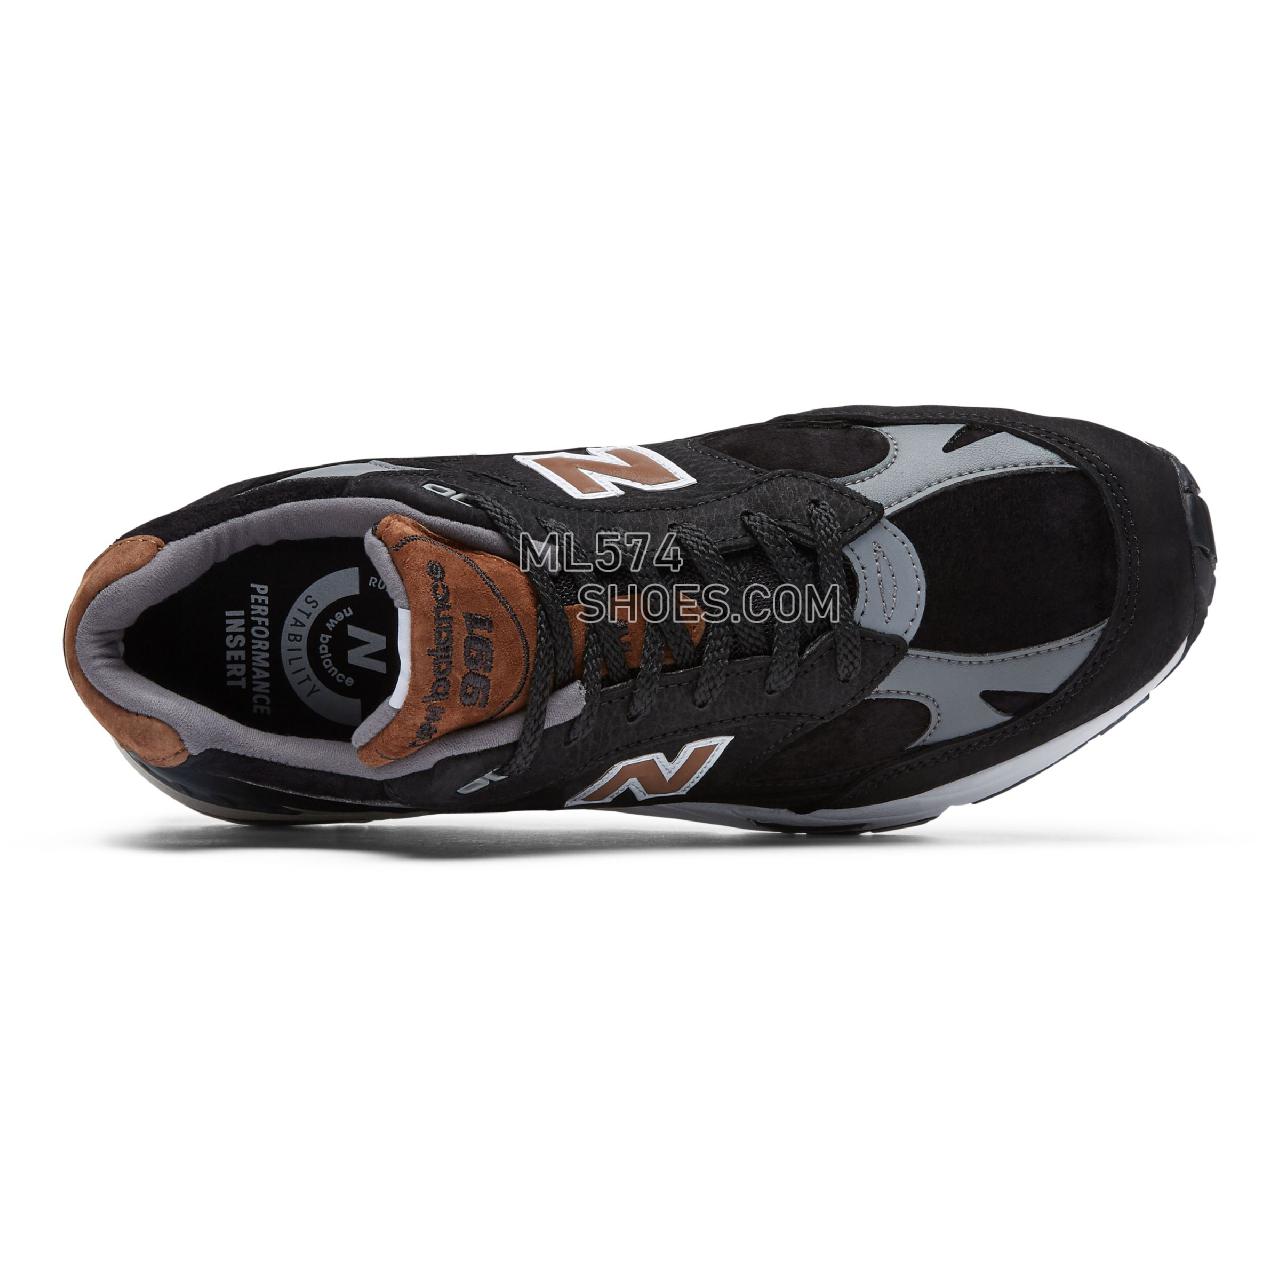 New Balance Made in UK 991 - Men's Made in UK 991 ML991V1-27419-M - Black with Brown - M991KT